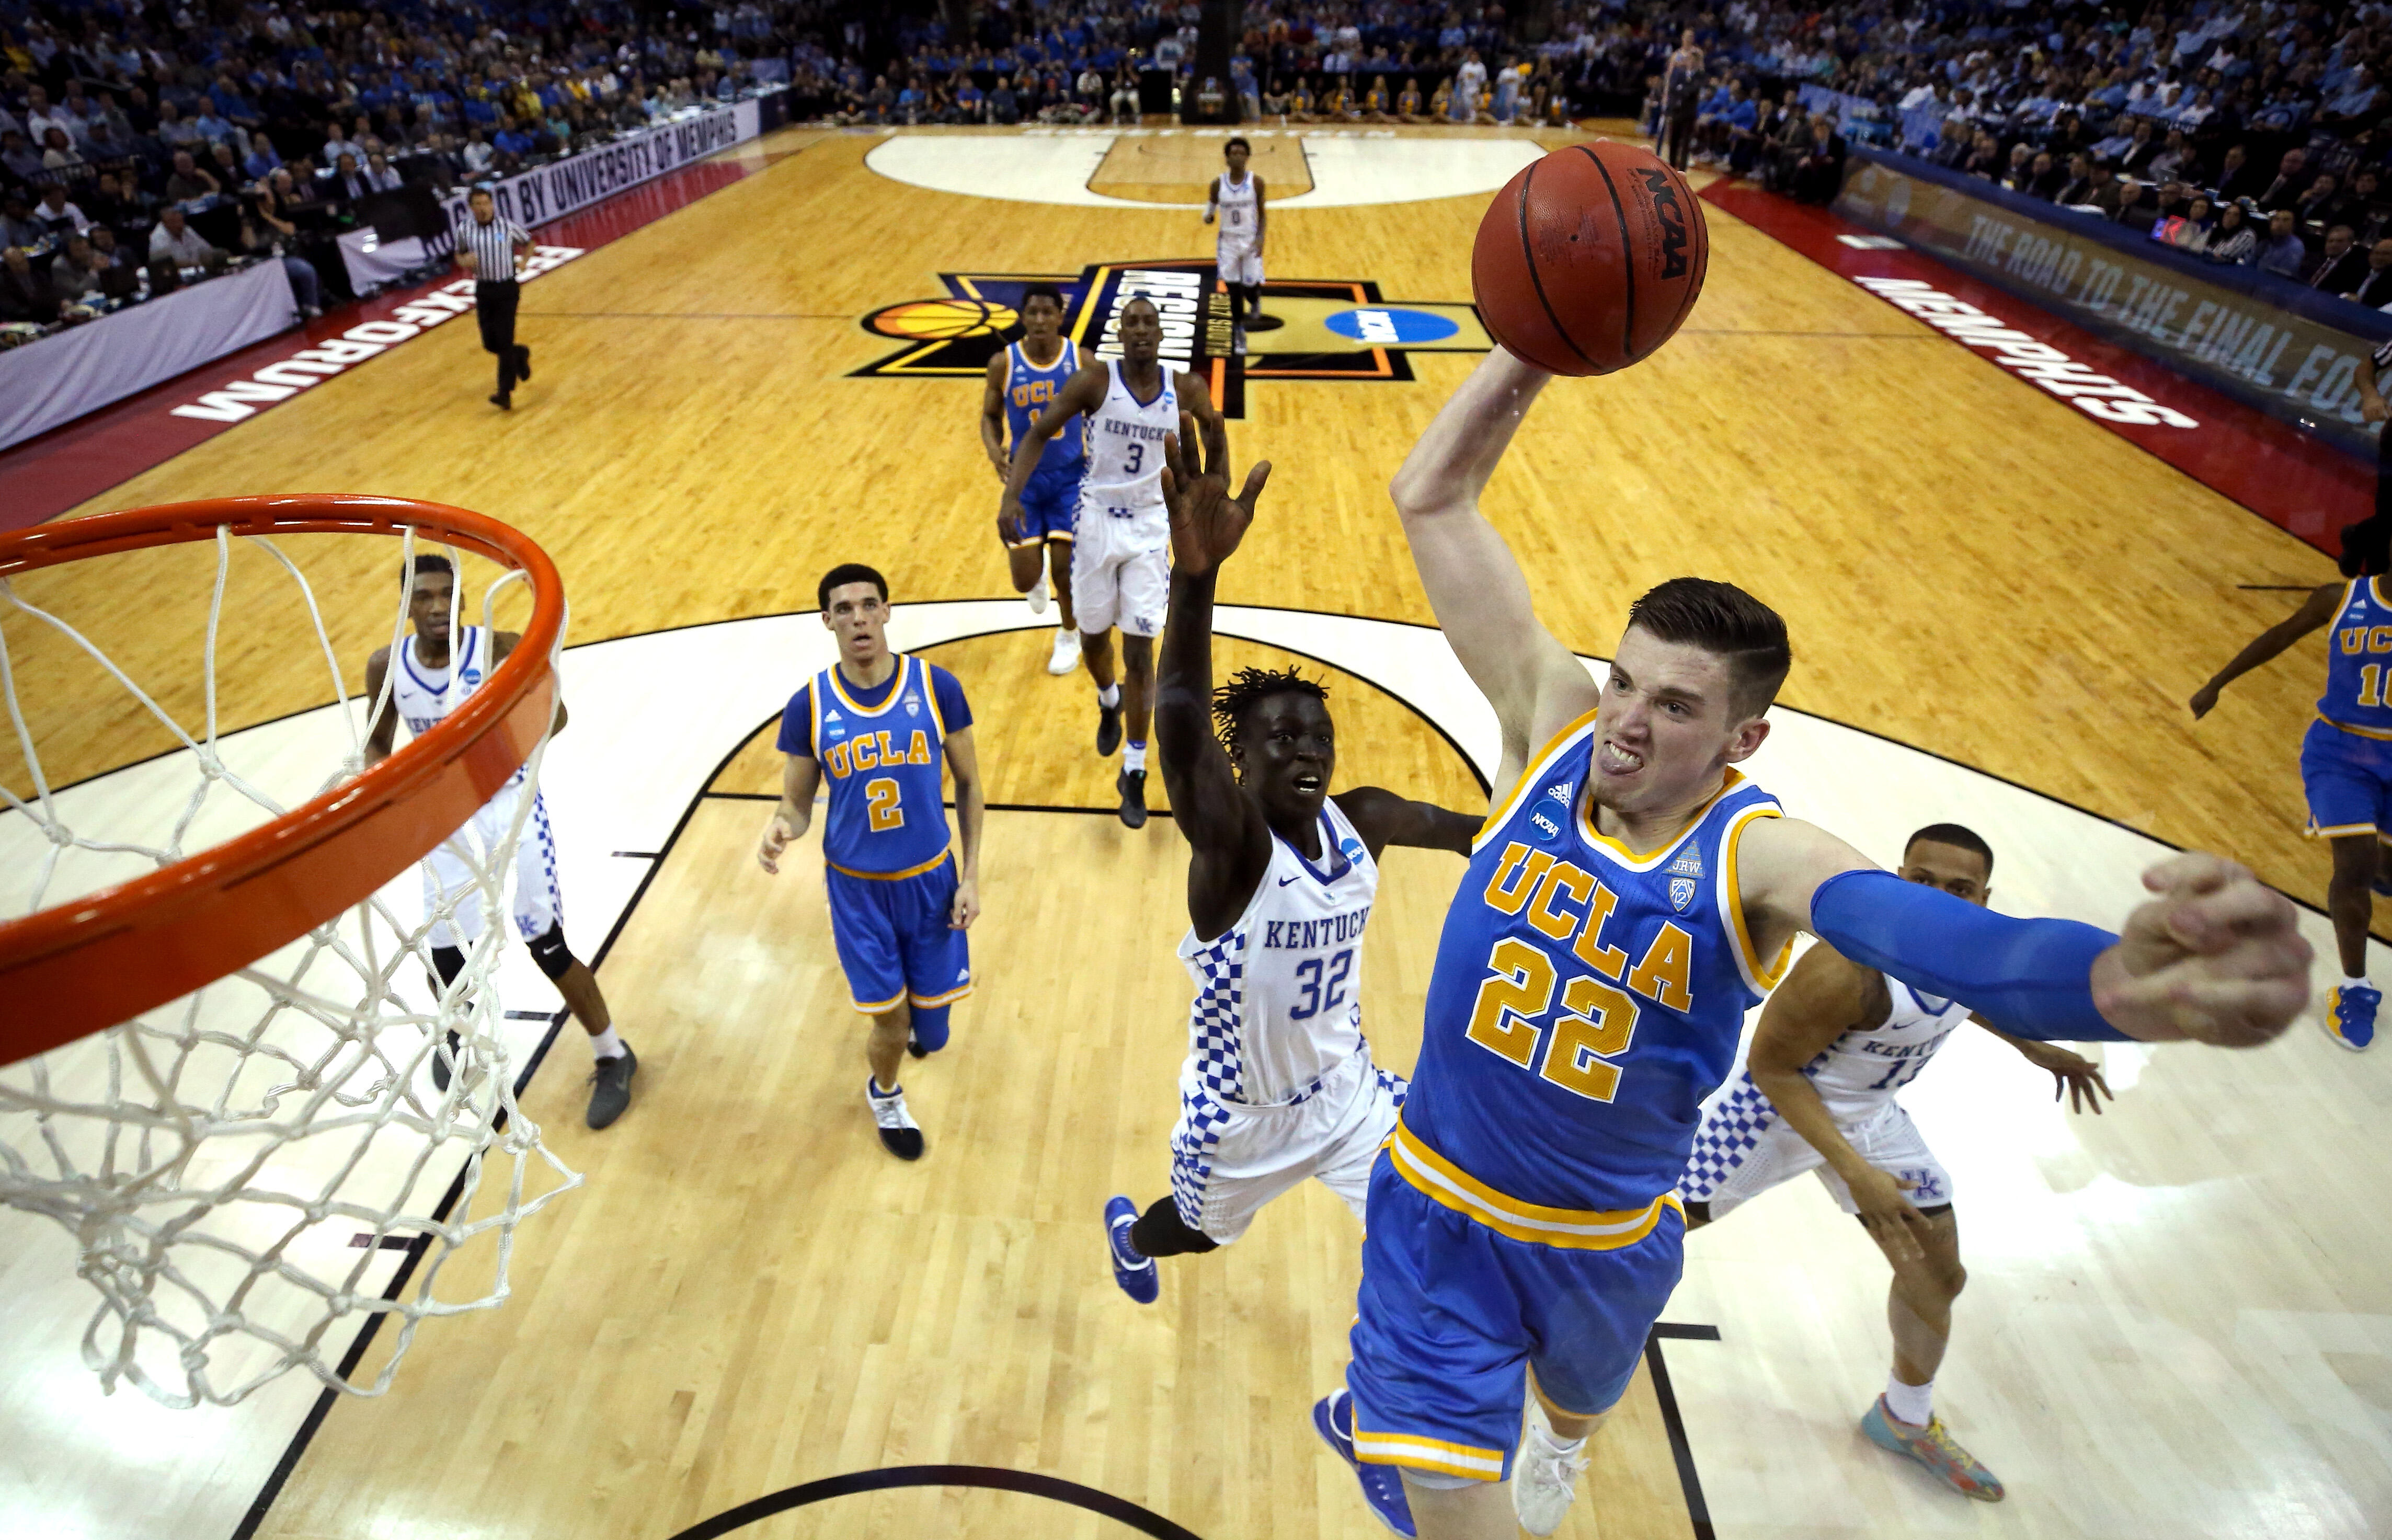 MEMPHIS, TN - MARCH 24: TJ Leaf #22 of the UCLA Bruins goes up for a dunk against Wenyen Gabriel #32 of the Kentucky Wildcats in the first half during the 2017 NCAA Men's Basketball Tournament South Regional at FedExForum on March 24, 2017 in Memphis, Ten